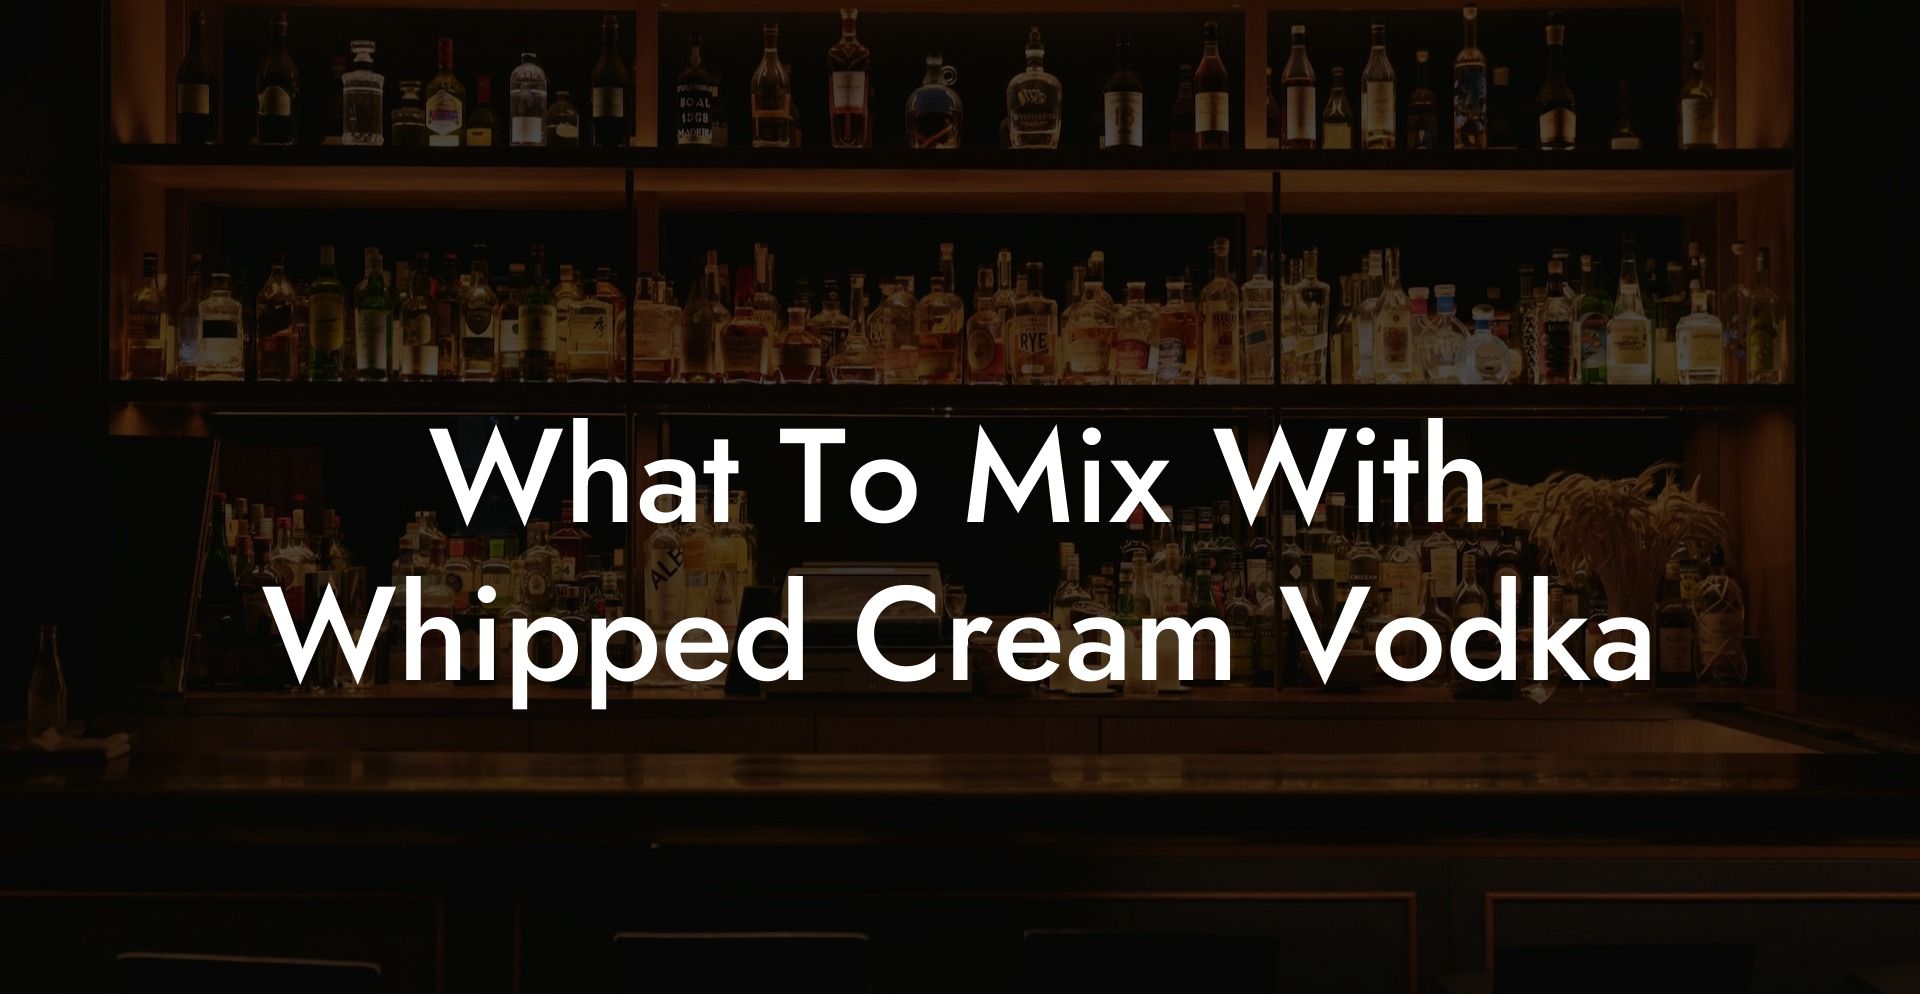 What To Mix With Whipped Cream Vodka